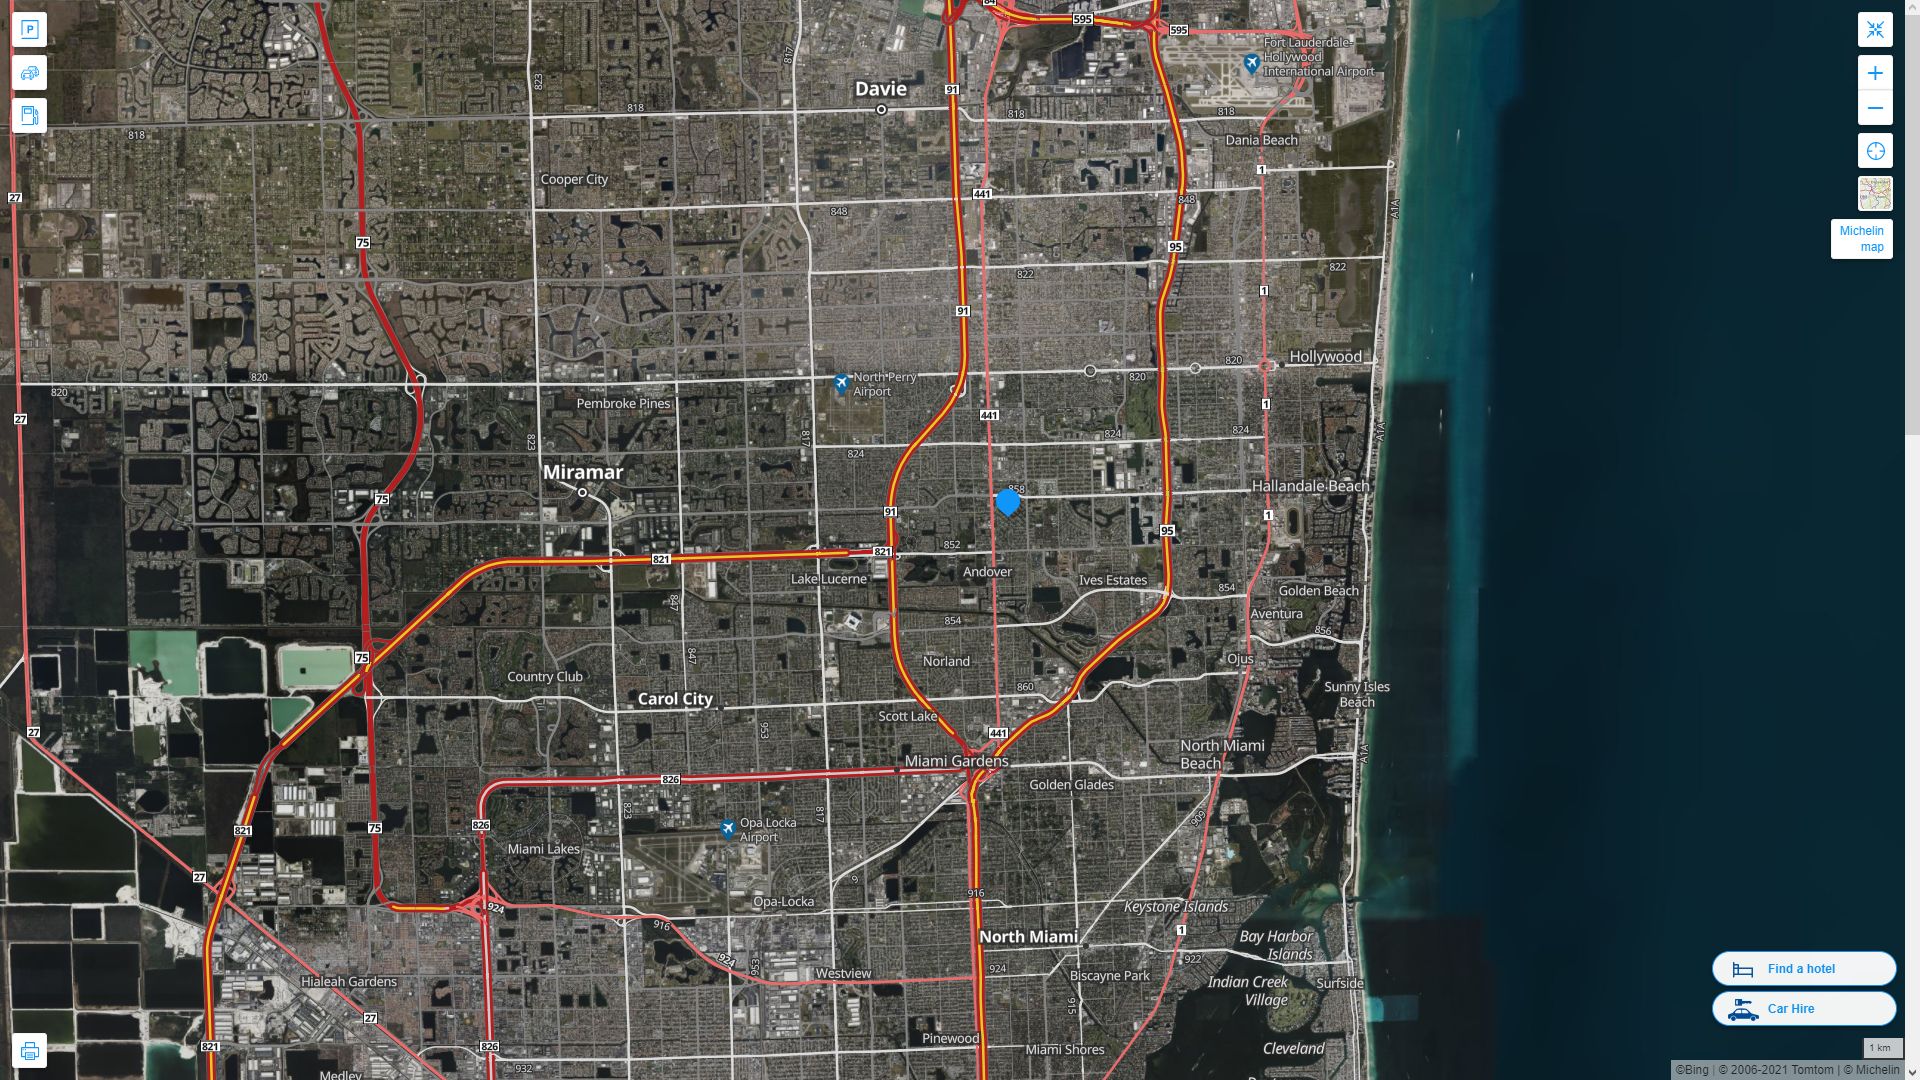 Miami Gardens Florida Highway and Road Map with Satellite View